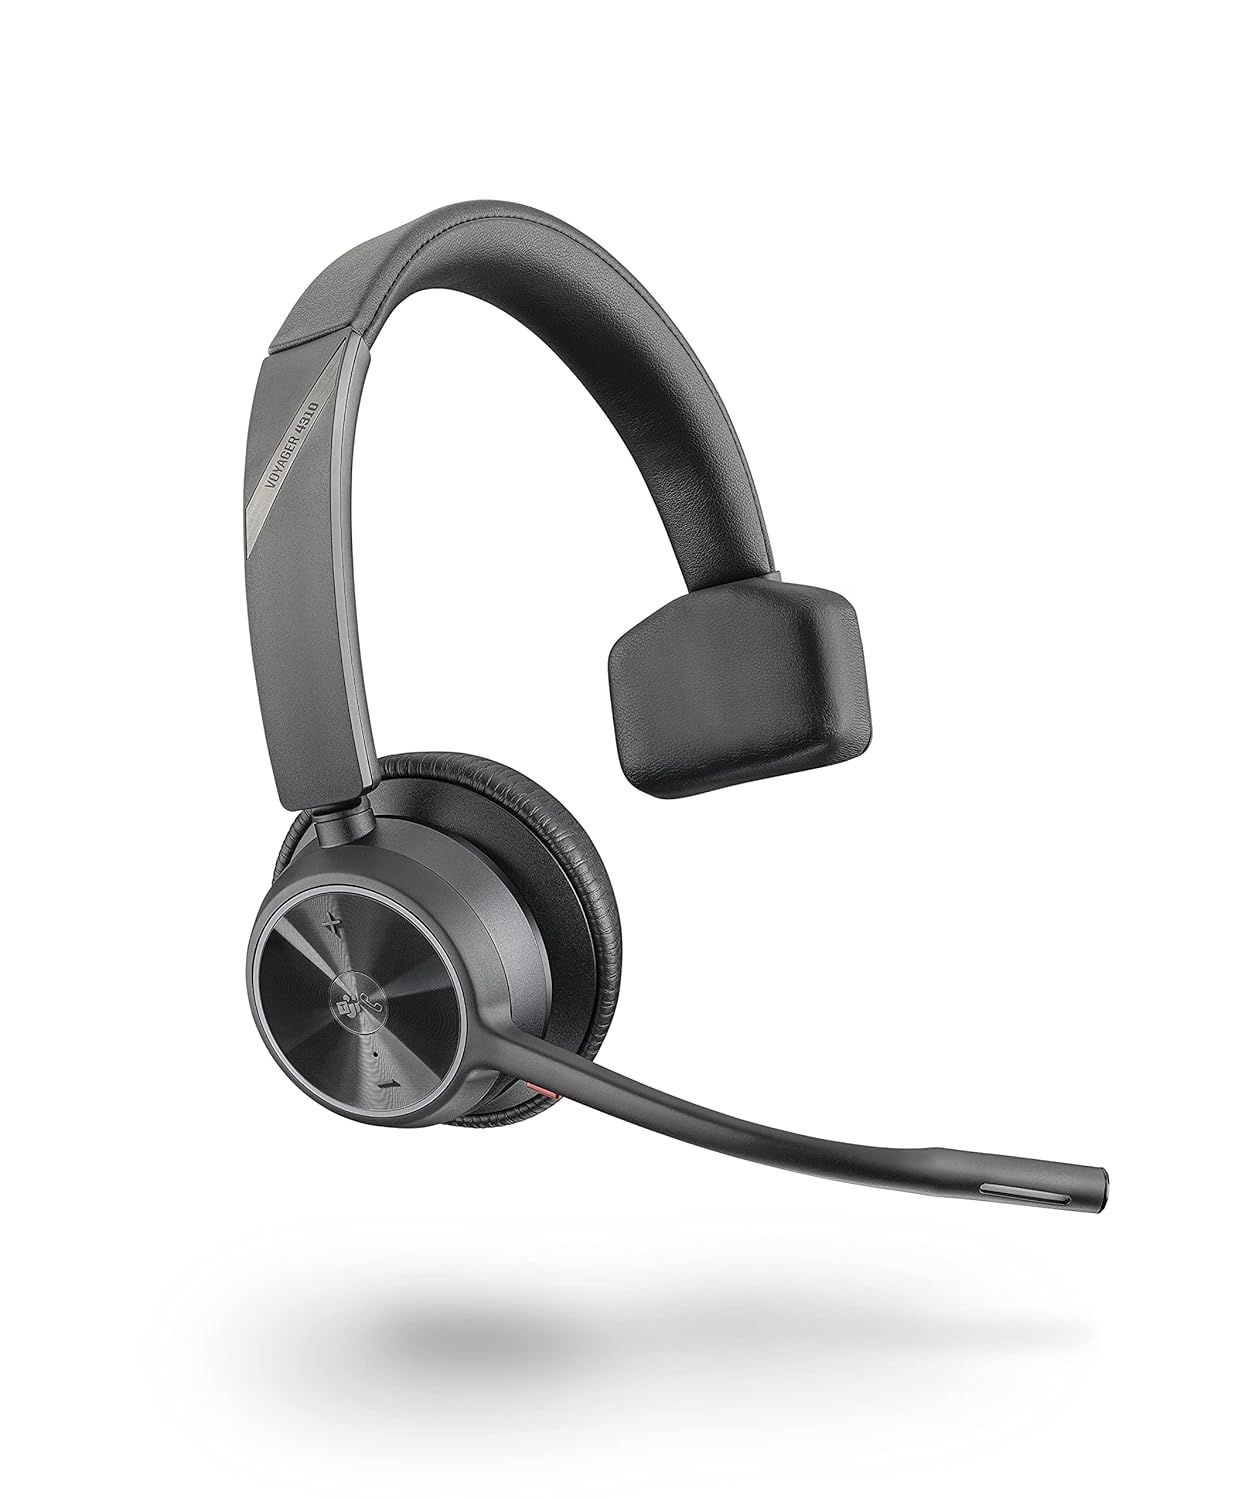 Poly by Plantronics – Voyager 4310 UC Wireless Headset (Plantronics) – Single-Ear Headset- Connect to PC/Mac via USB-C Bluetooth Adapter, Cell Phone via Bluetooth, Black, (218473-02)